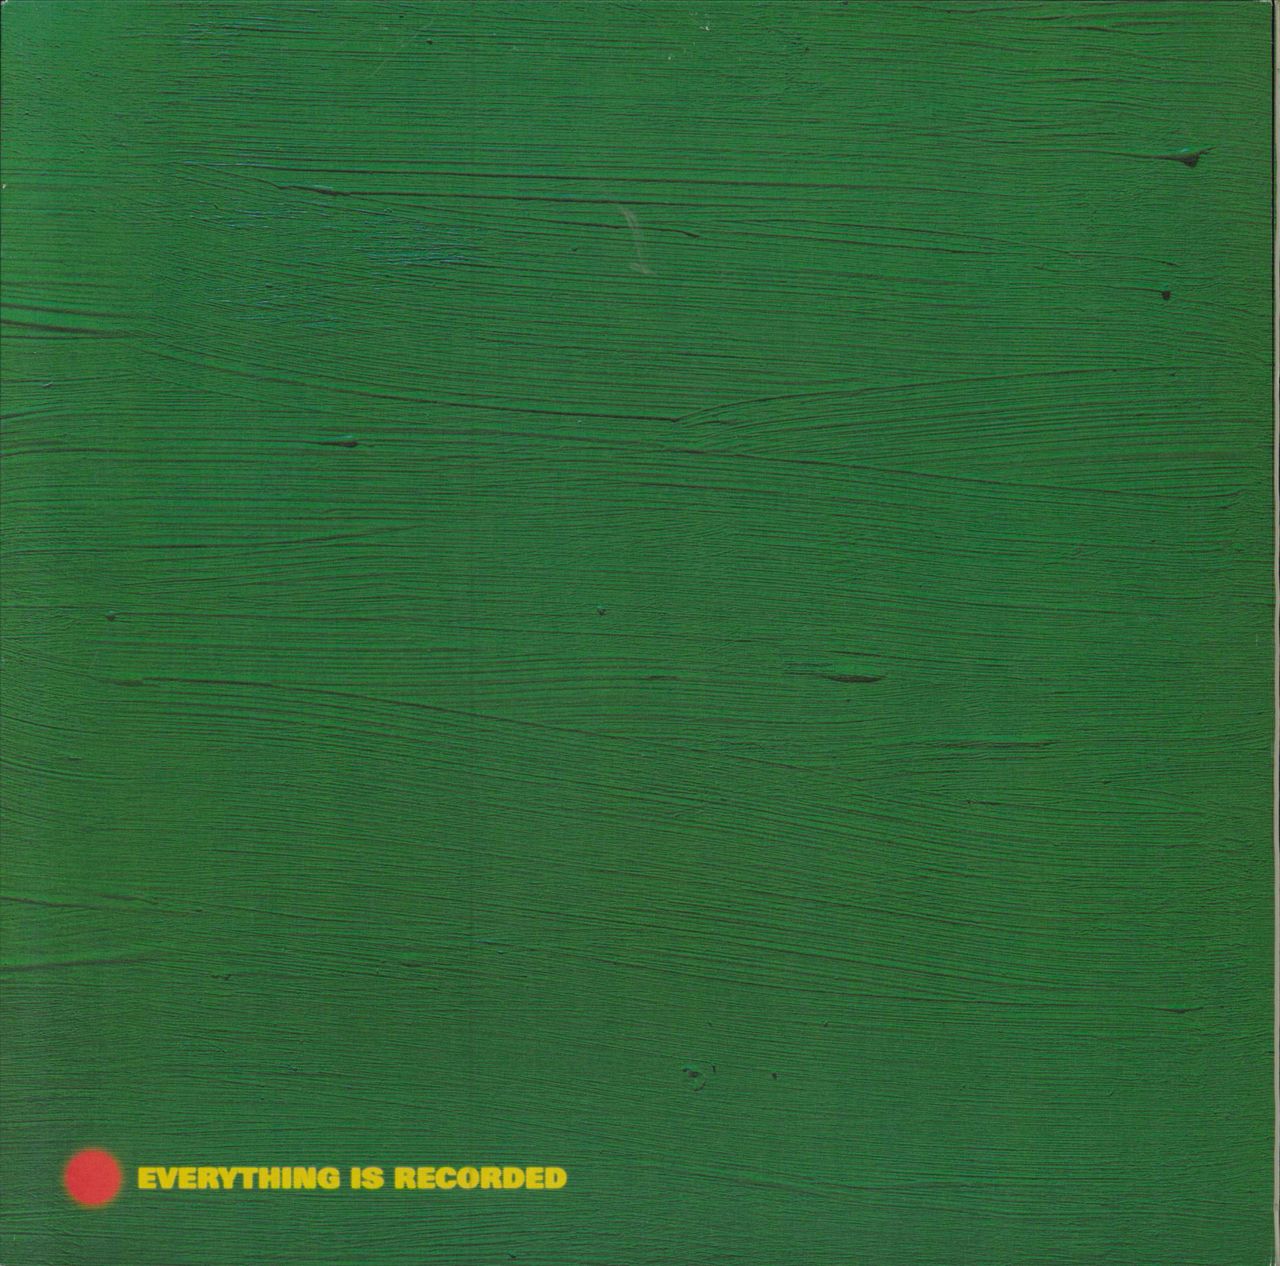 Everything Is Recorded Mountains Of Gold UK 12" vinyl single (12 inch record / Maxi-single) XL848T